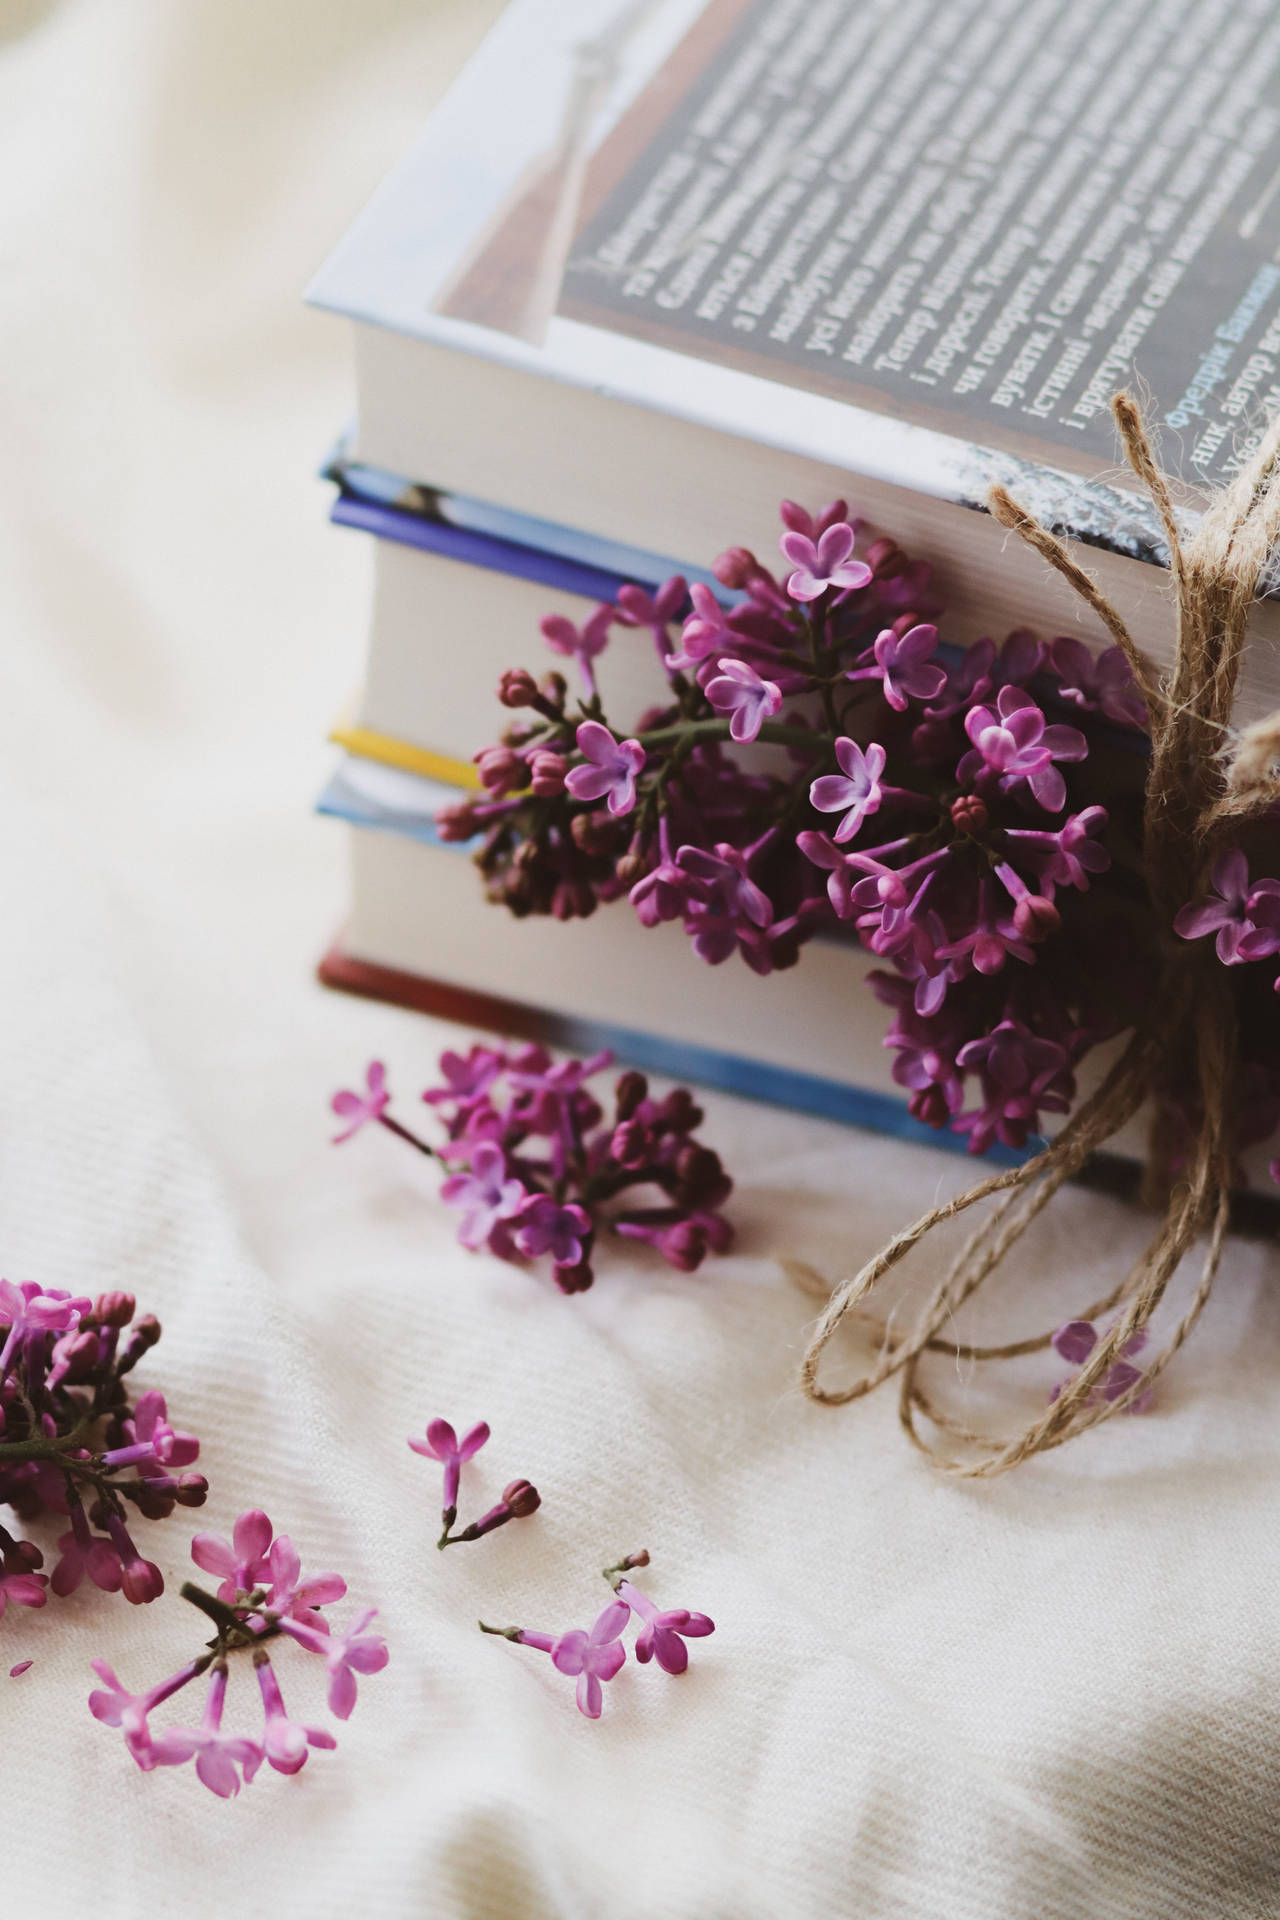 Books And Purple Flowers Aesthetic Wallpaper